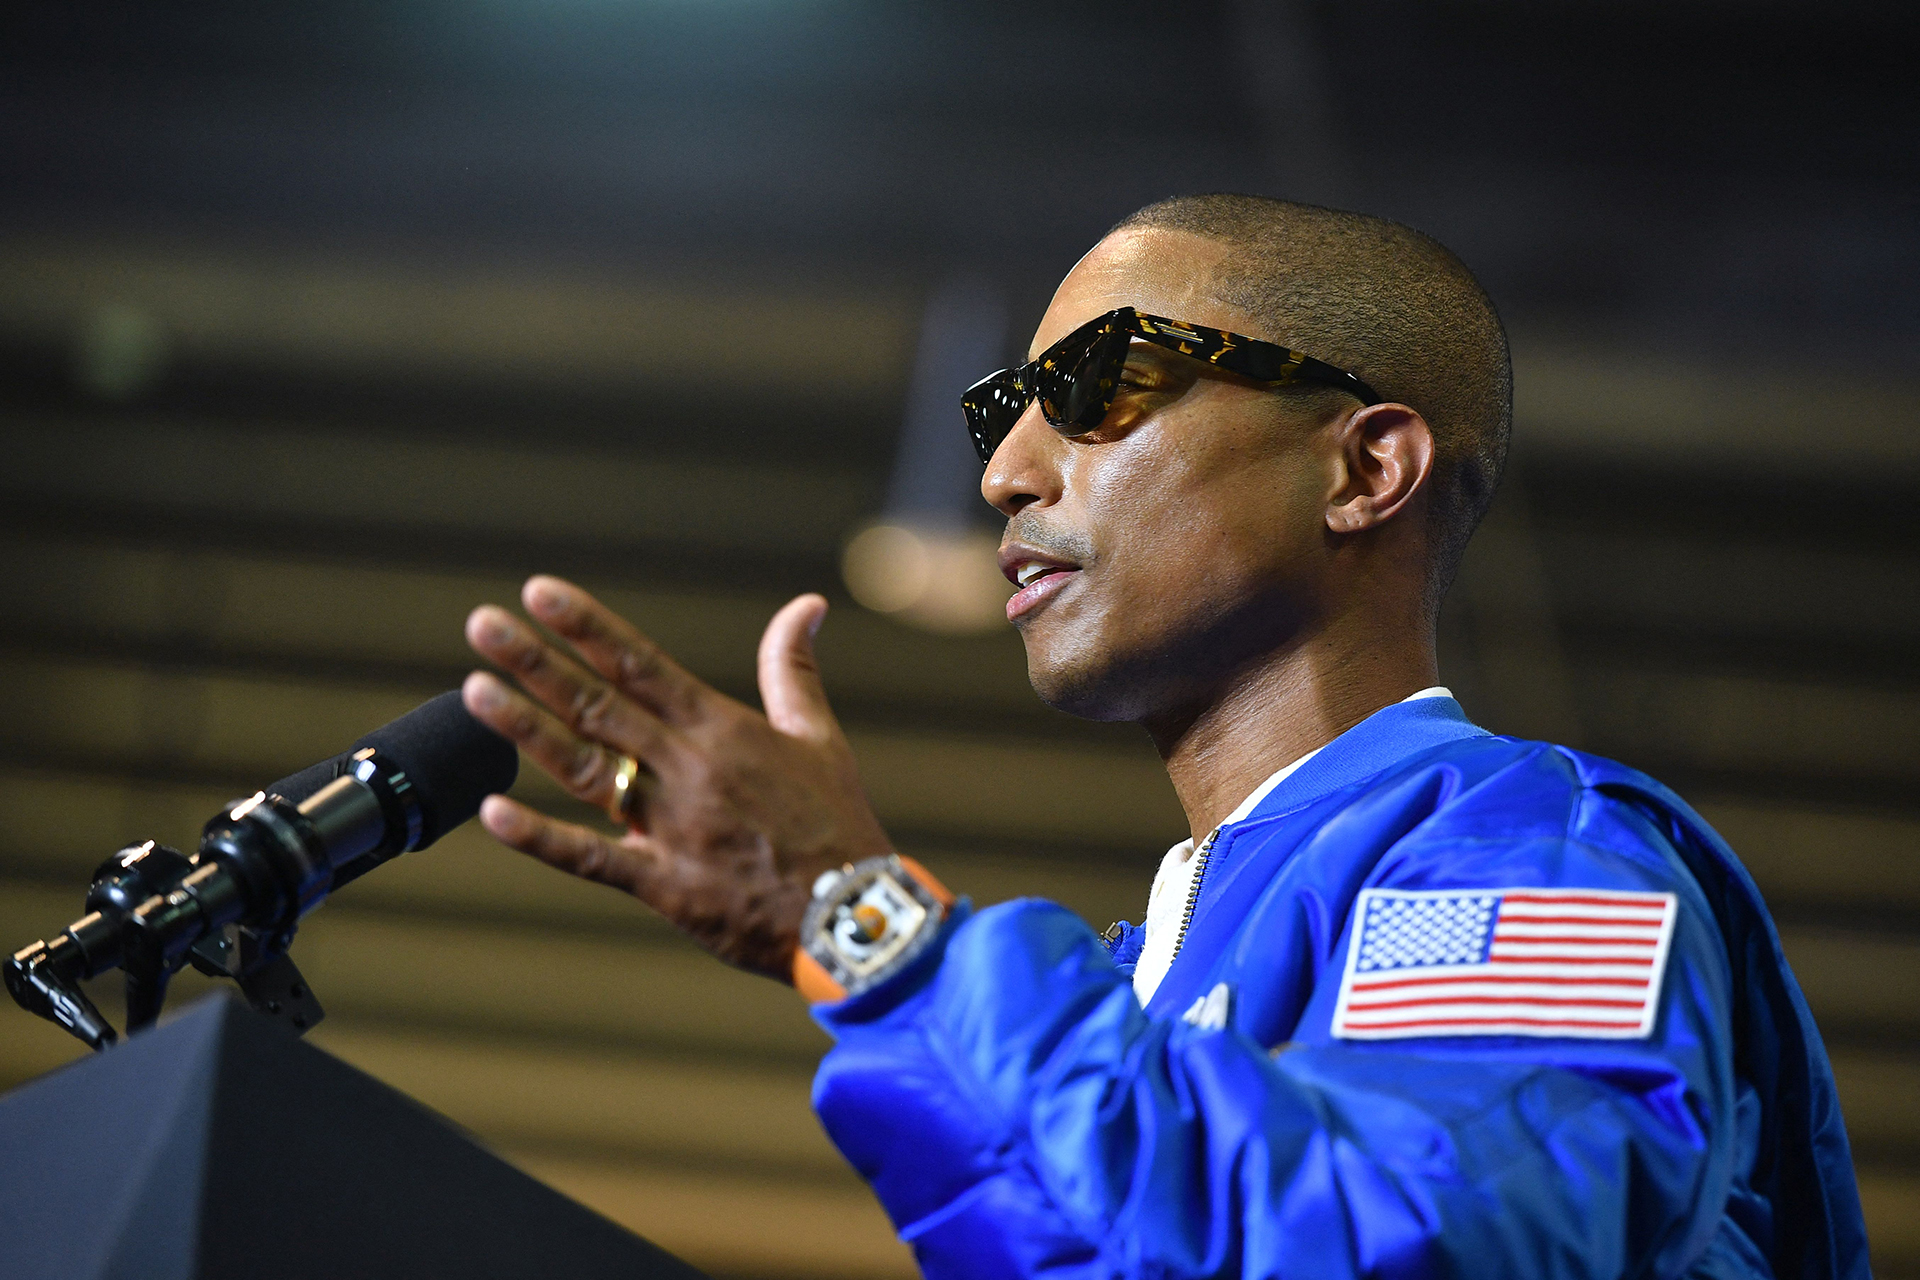 Pharrell Williams gestures as he speaks at a campaign rally for Virginia gubernatorial candidate Terry McAuliffe